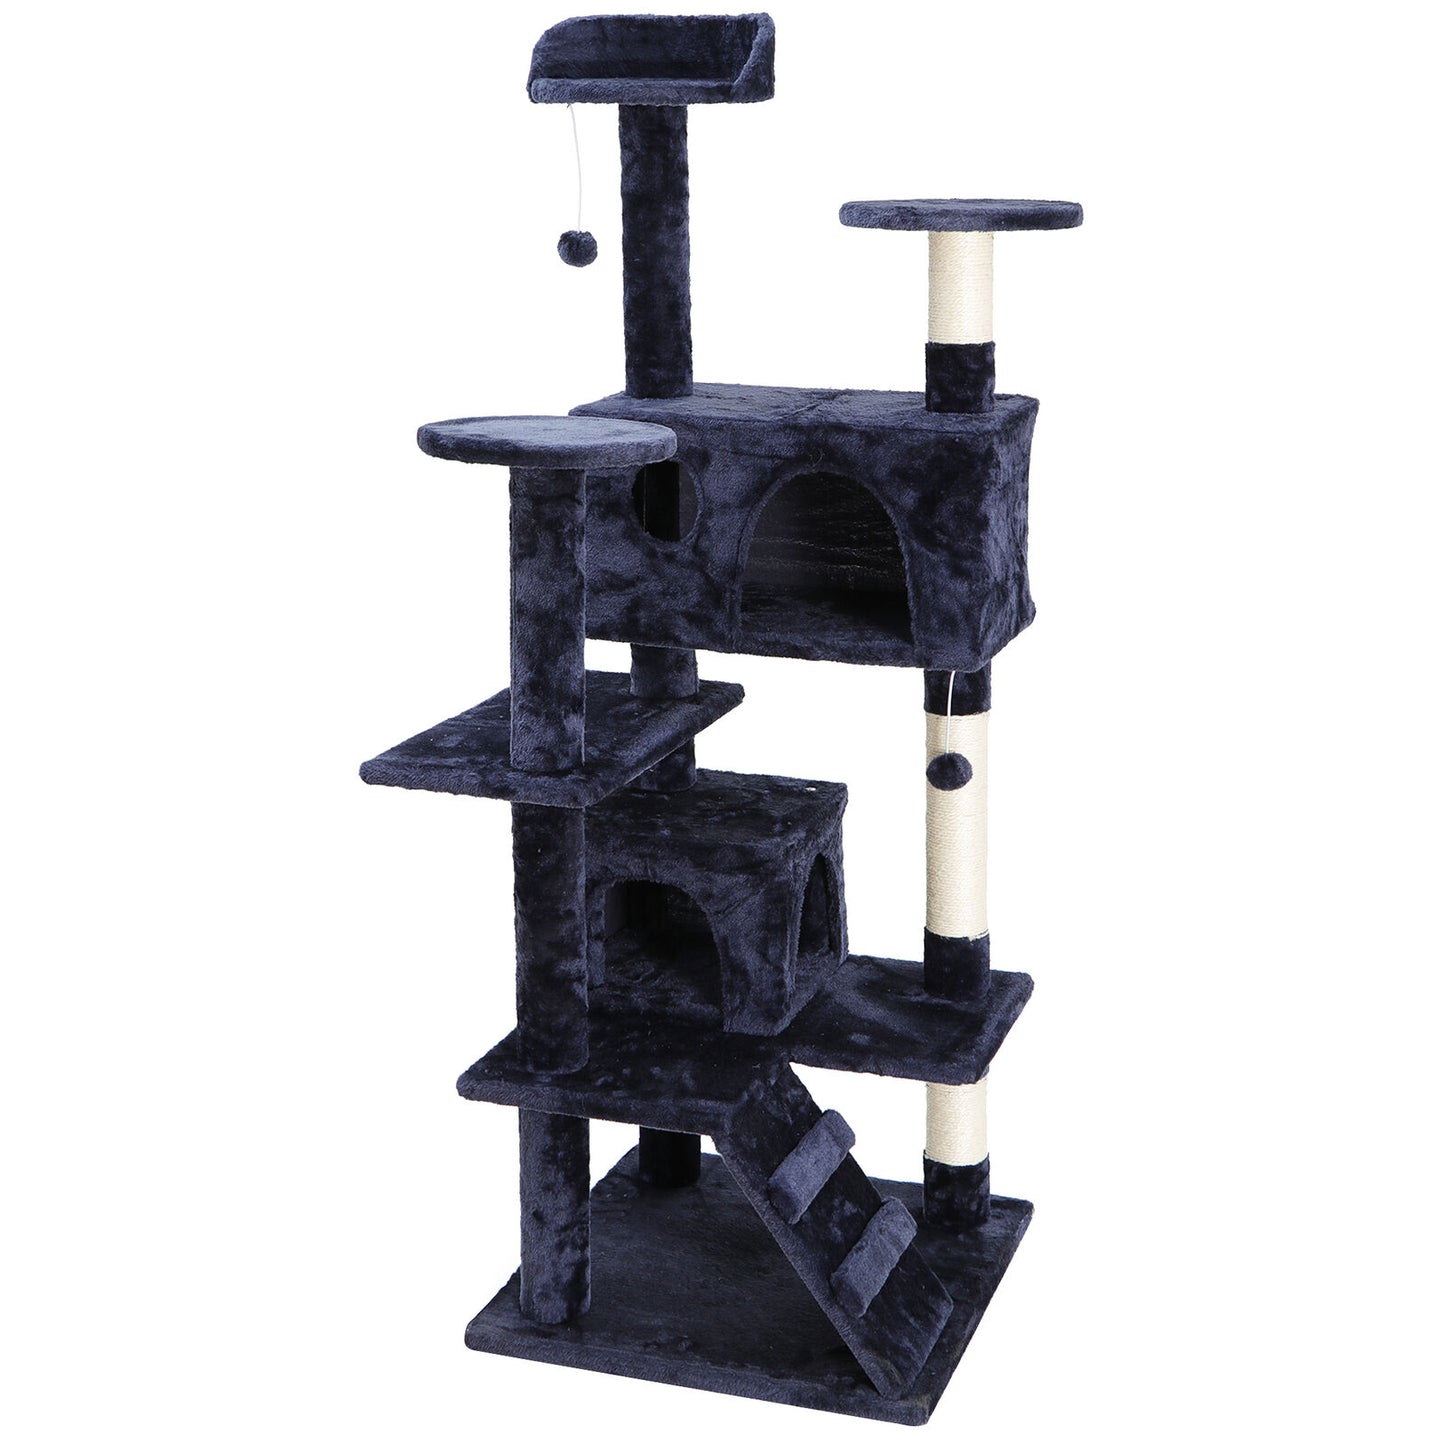 53" Sturdy Cat Tree Activity Tower Kitty Multilevel w/Padded Viewing Perch Blue